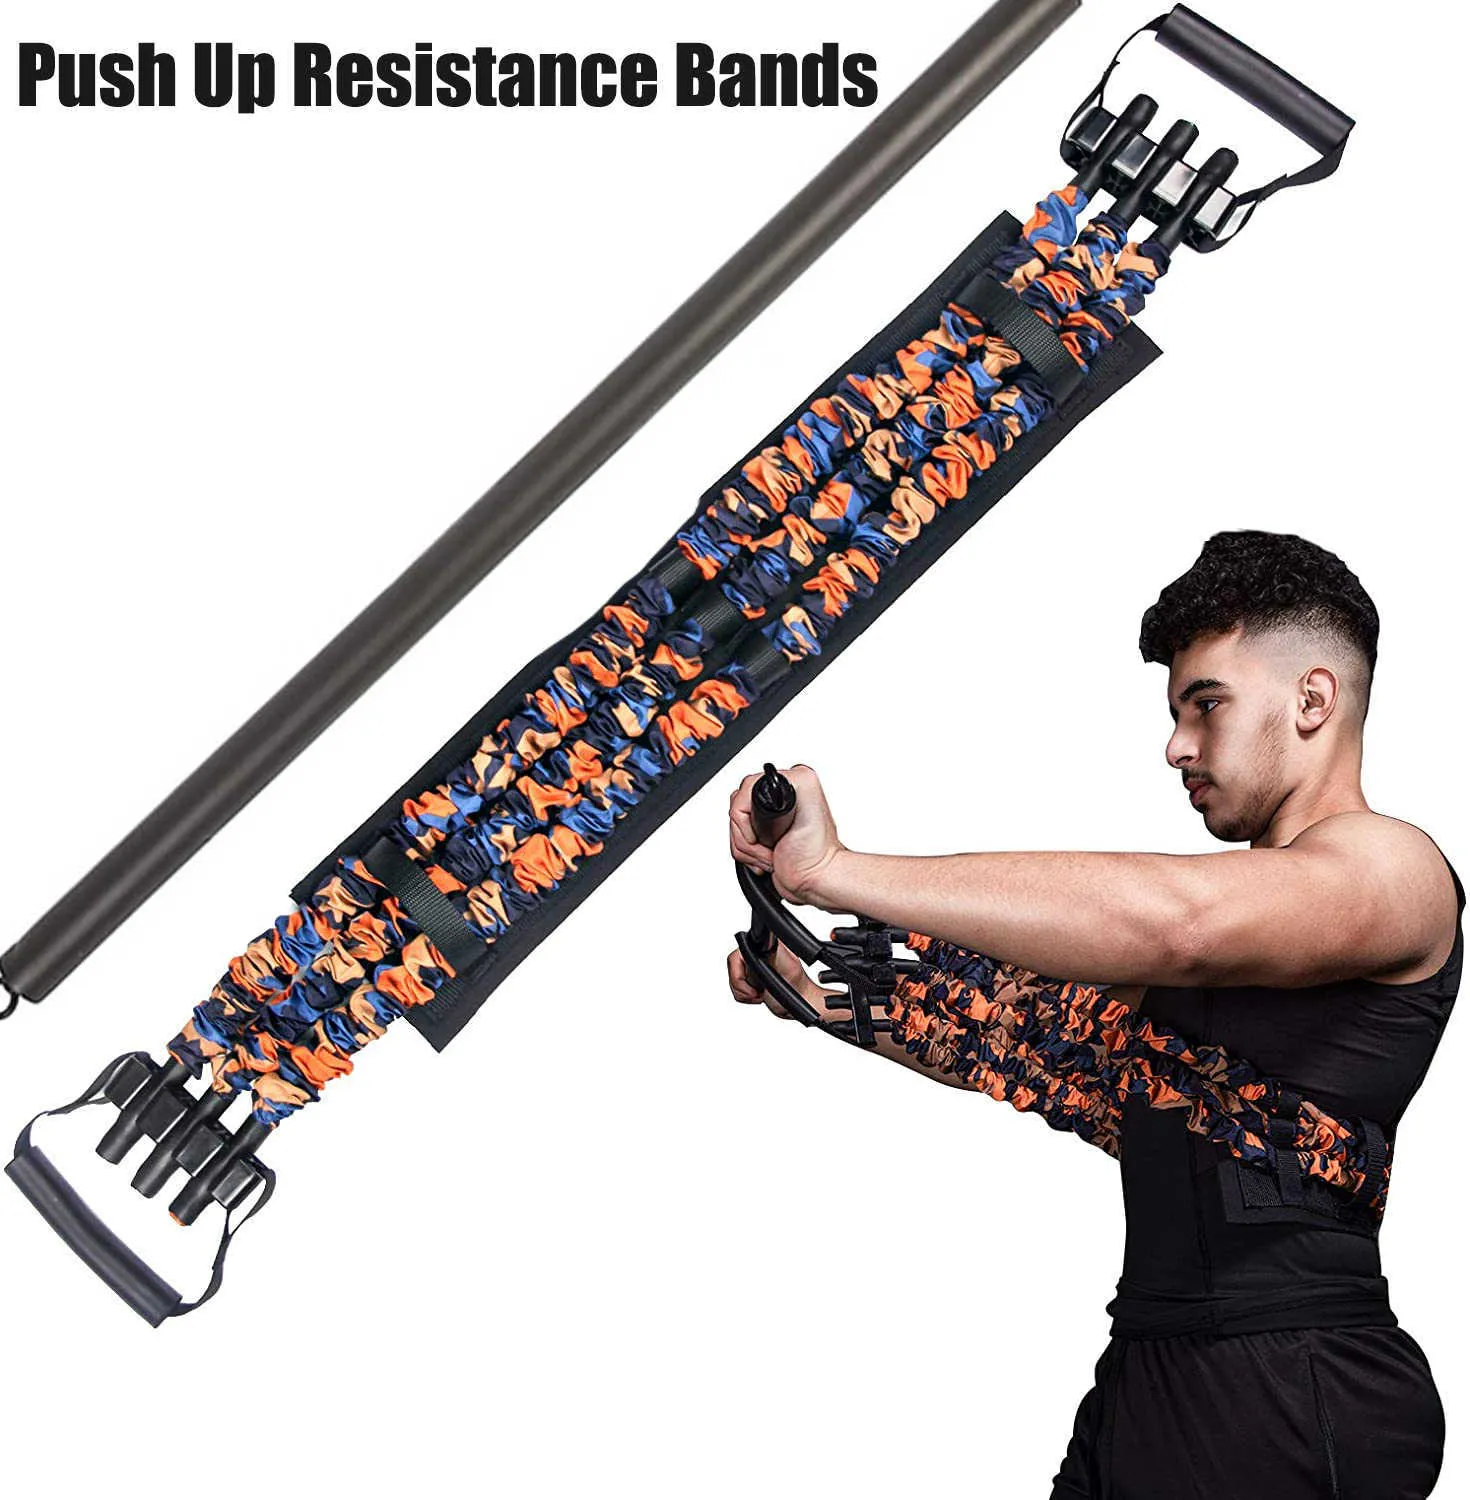 Upgraded Adjustable Resistance Band Leg Extension With Bar For Chest  Builder Workout, Home Gym, Travel Training HKD230710 From Musuo10, $22.86